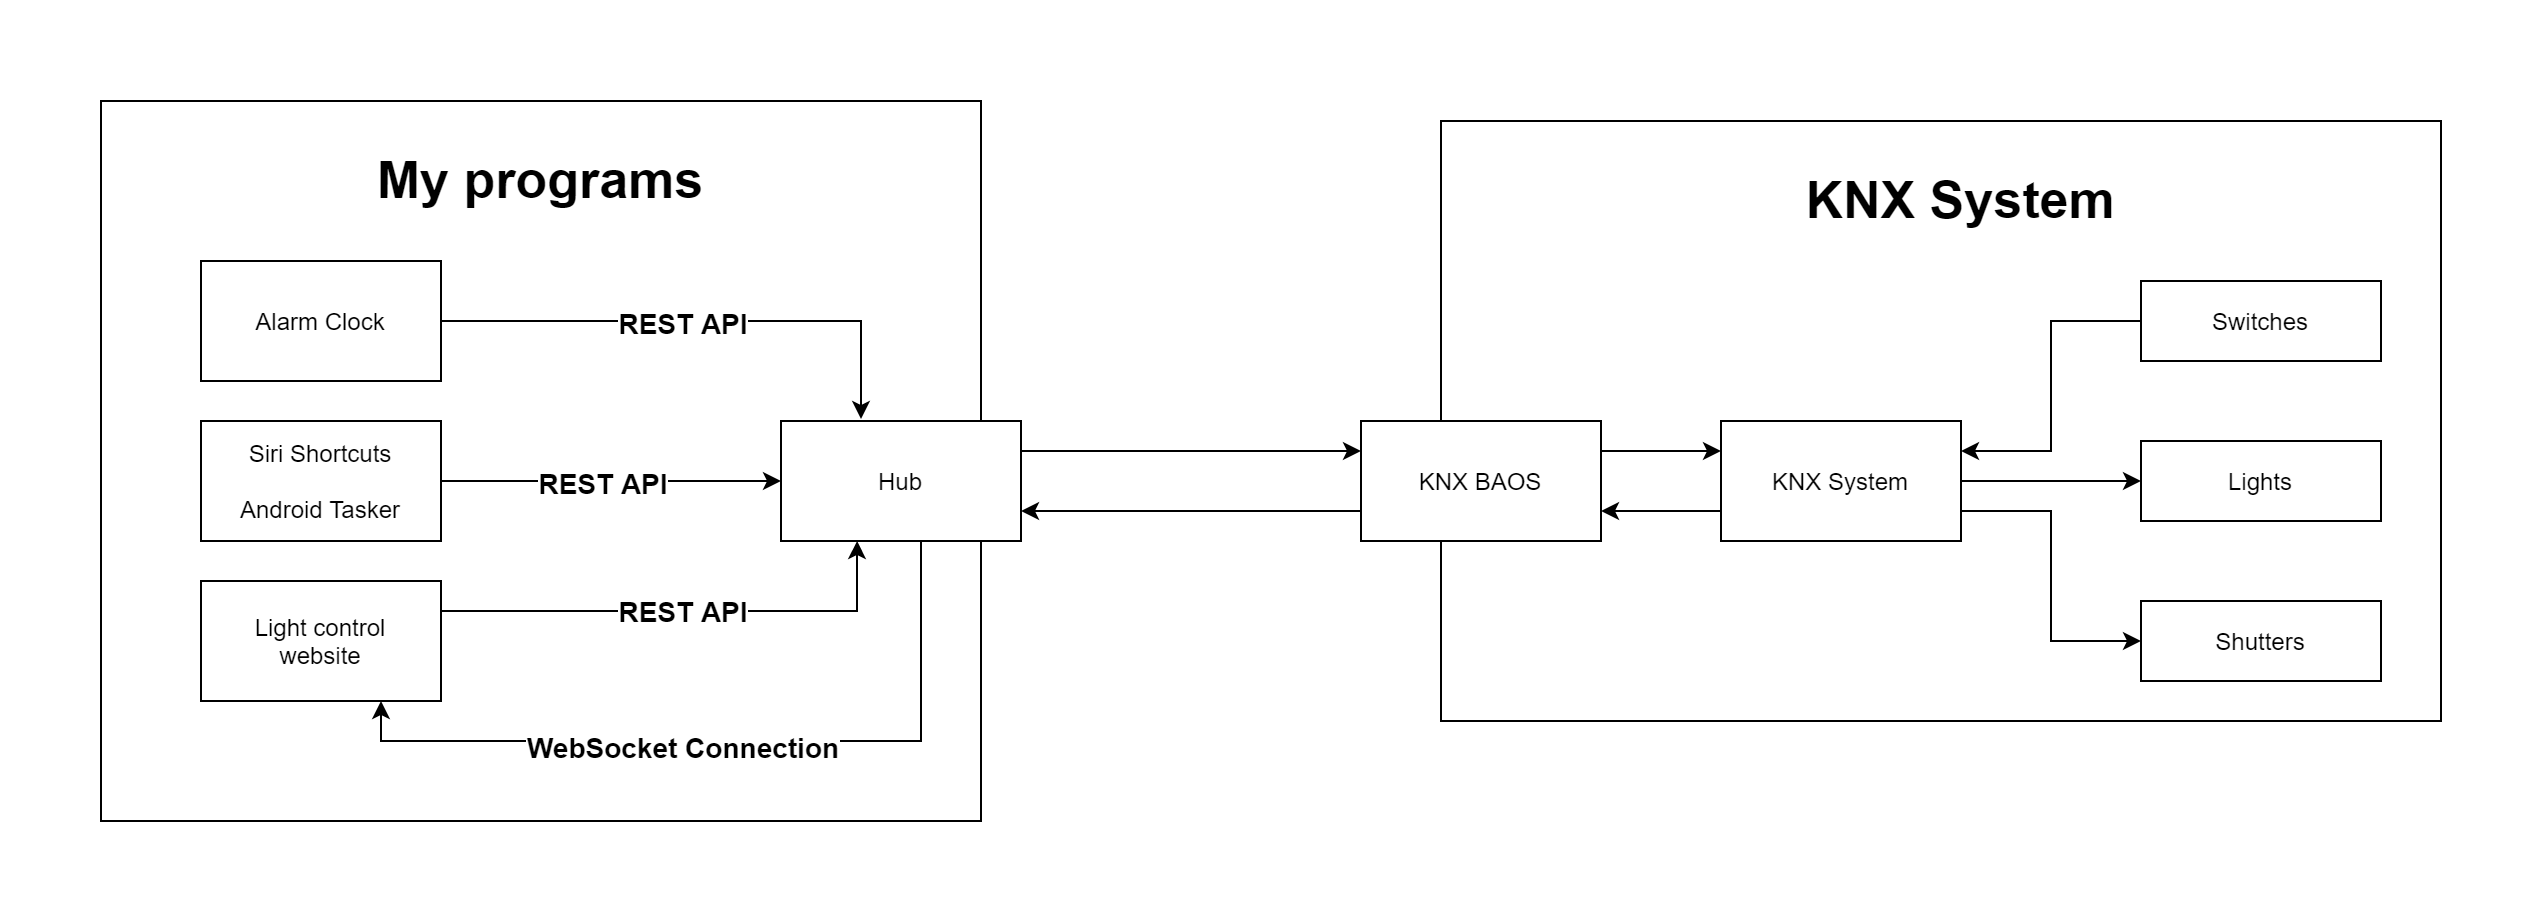 This diagram shows the setup of how my programs interact with the hub, which connects to the KNX BAOS system